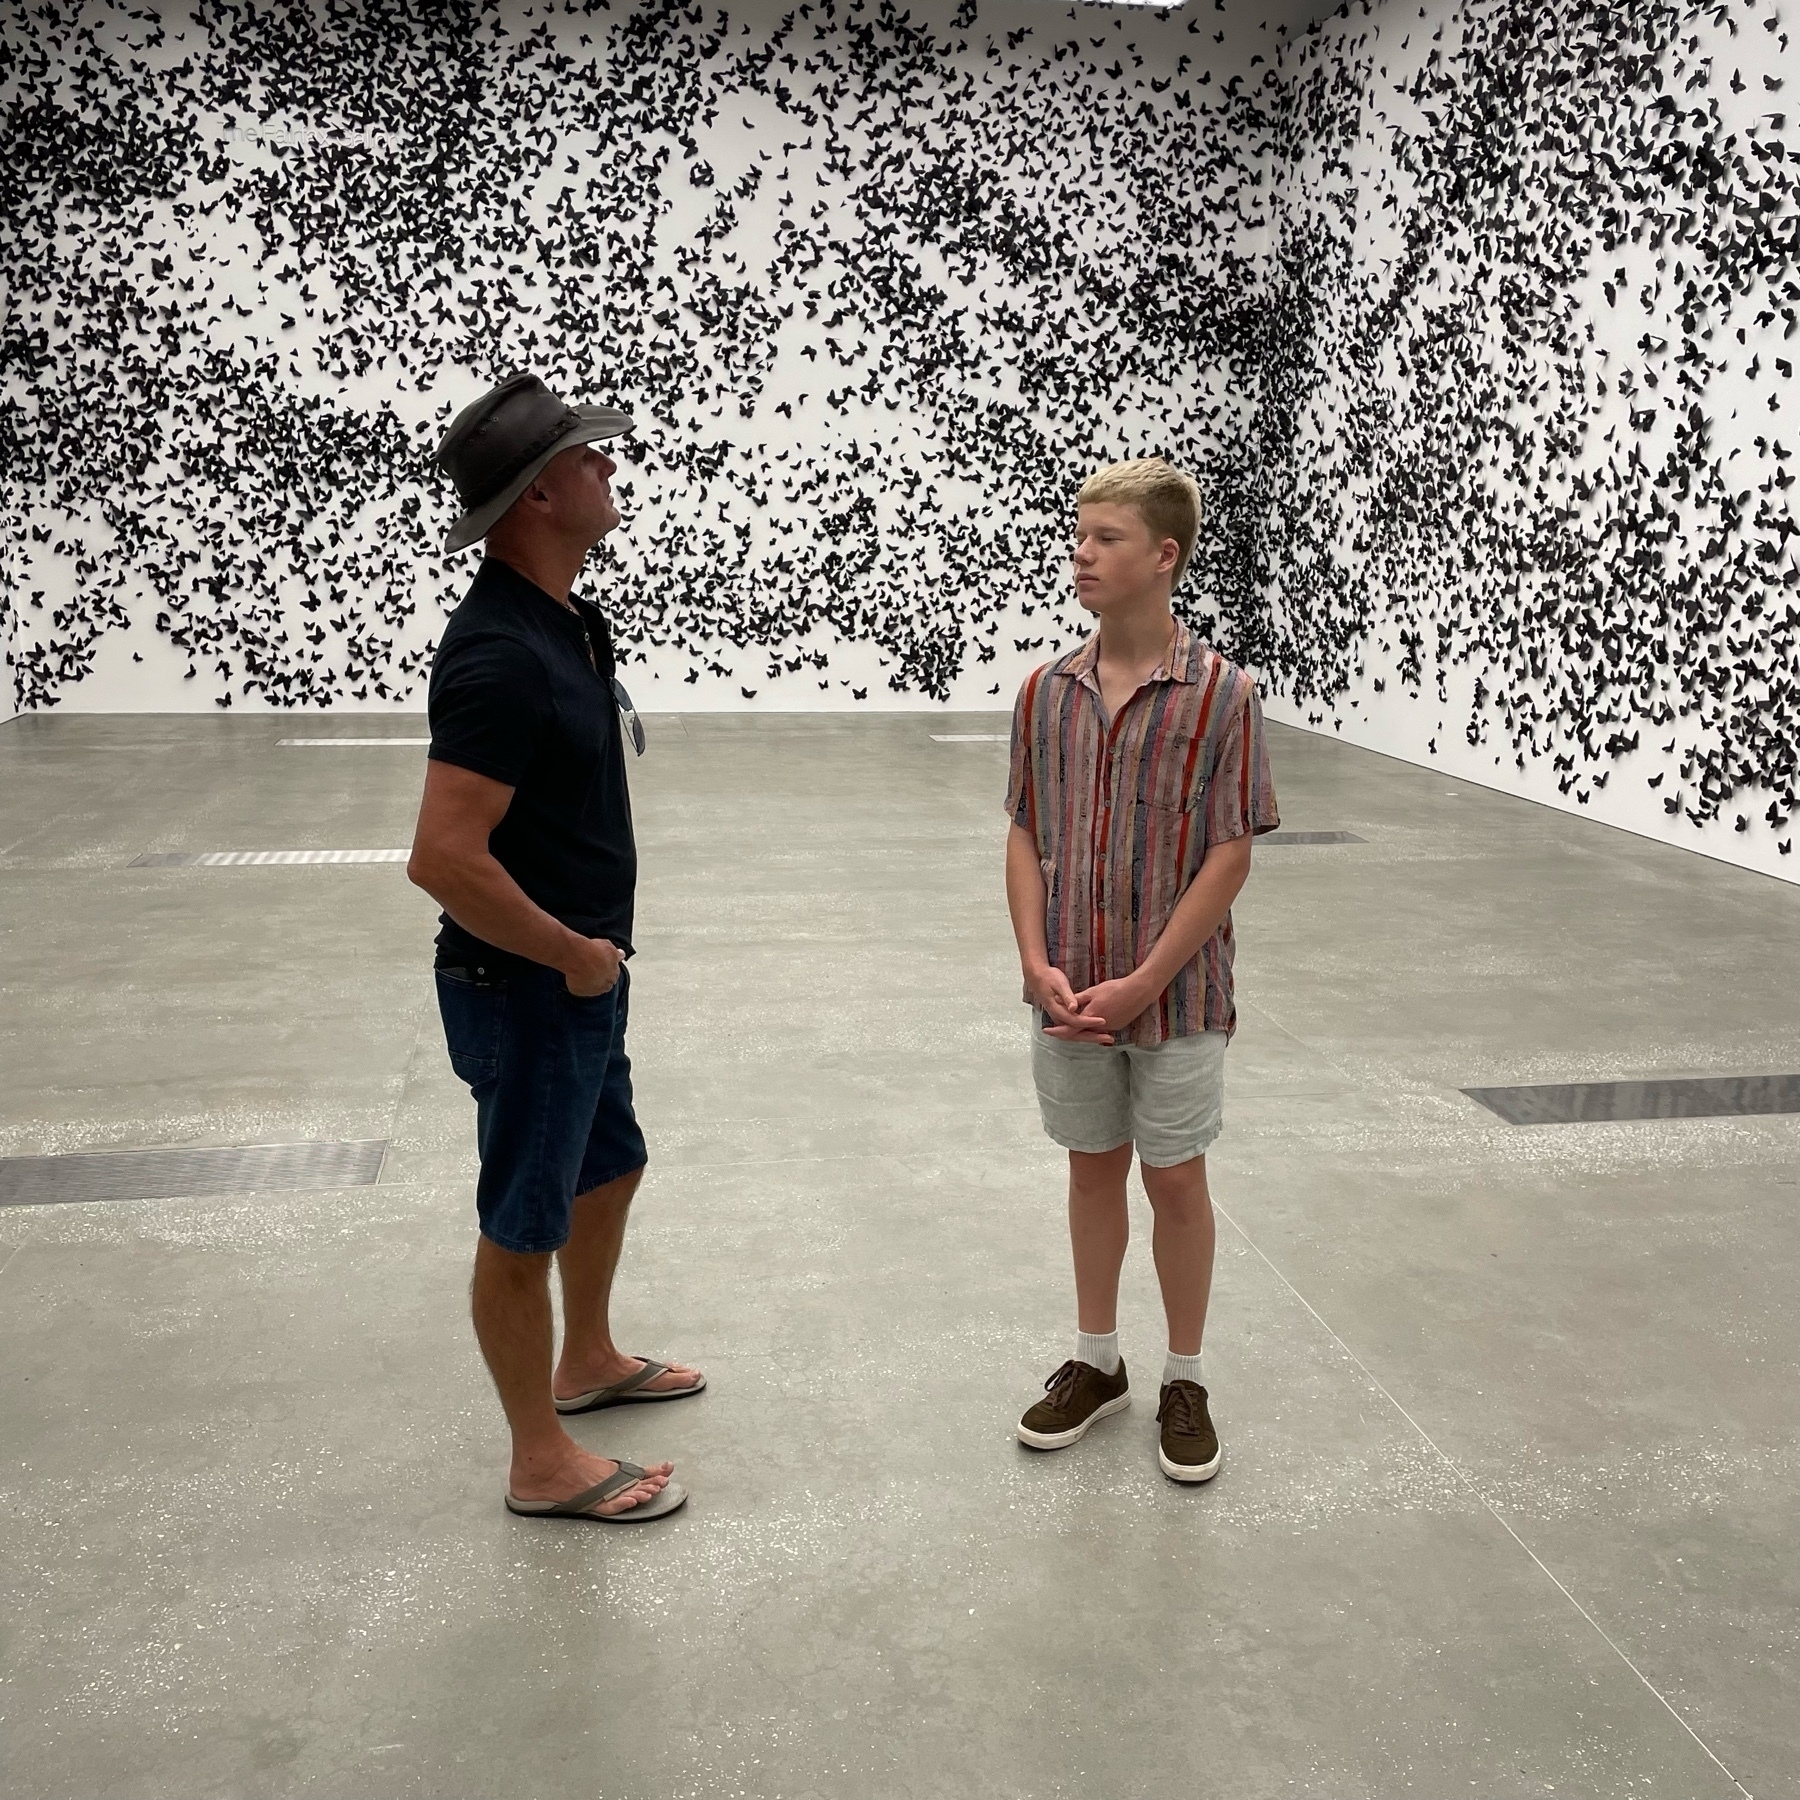 Two people standing in a room of thousands of black paper butterflies